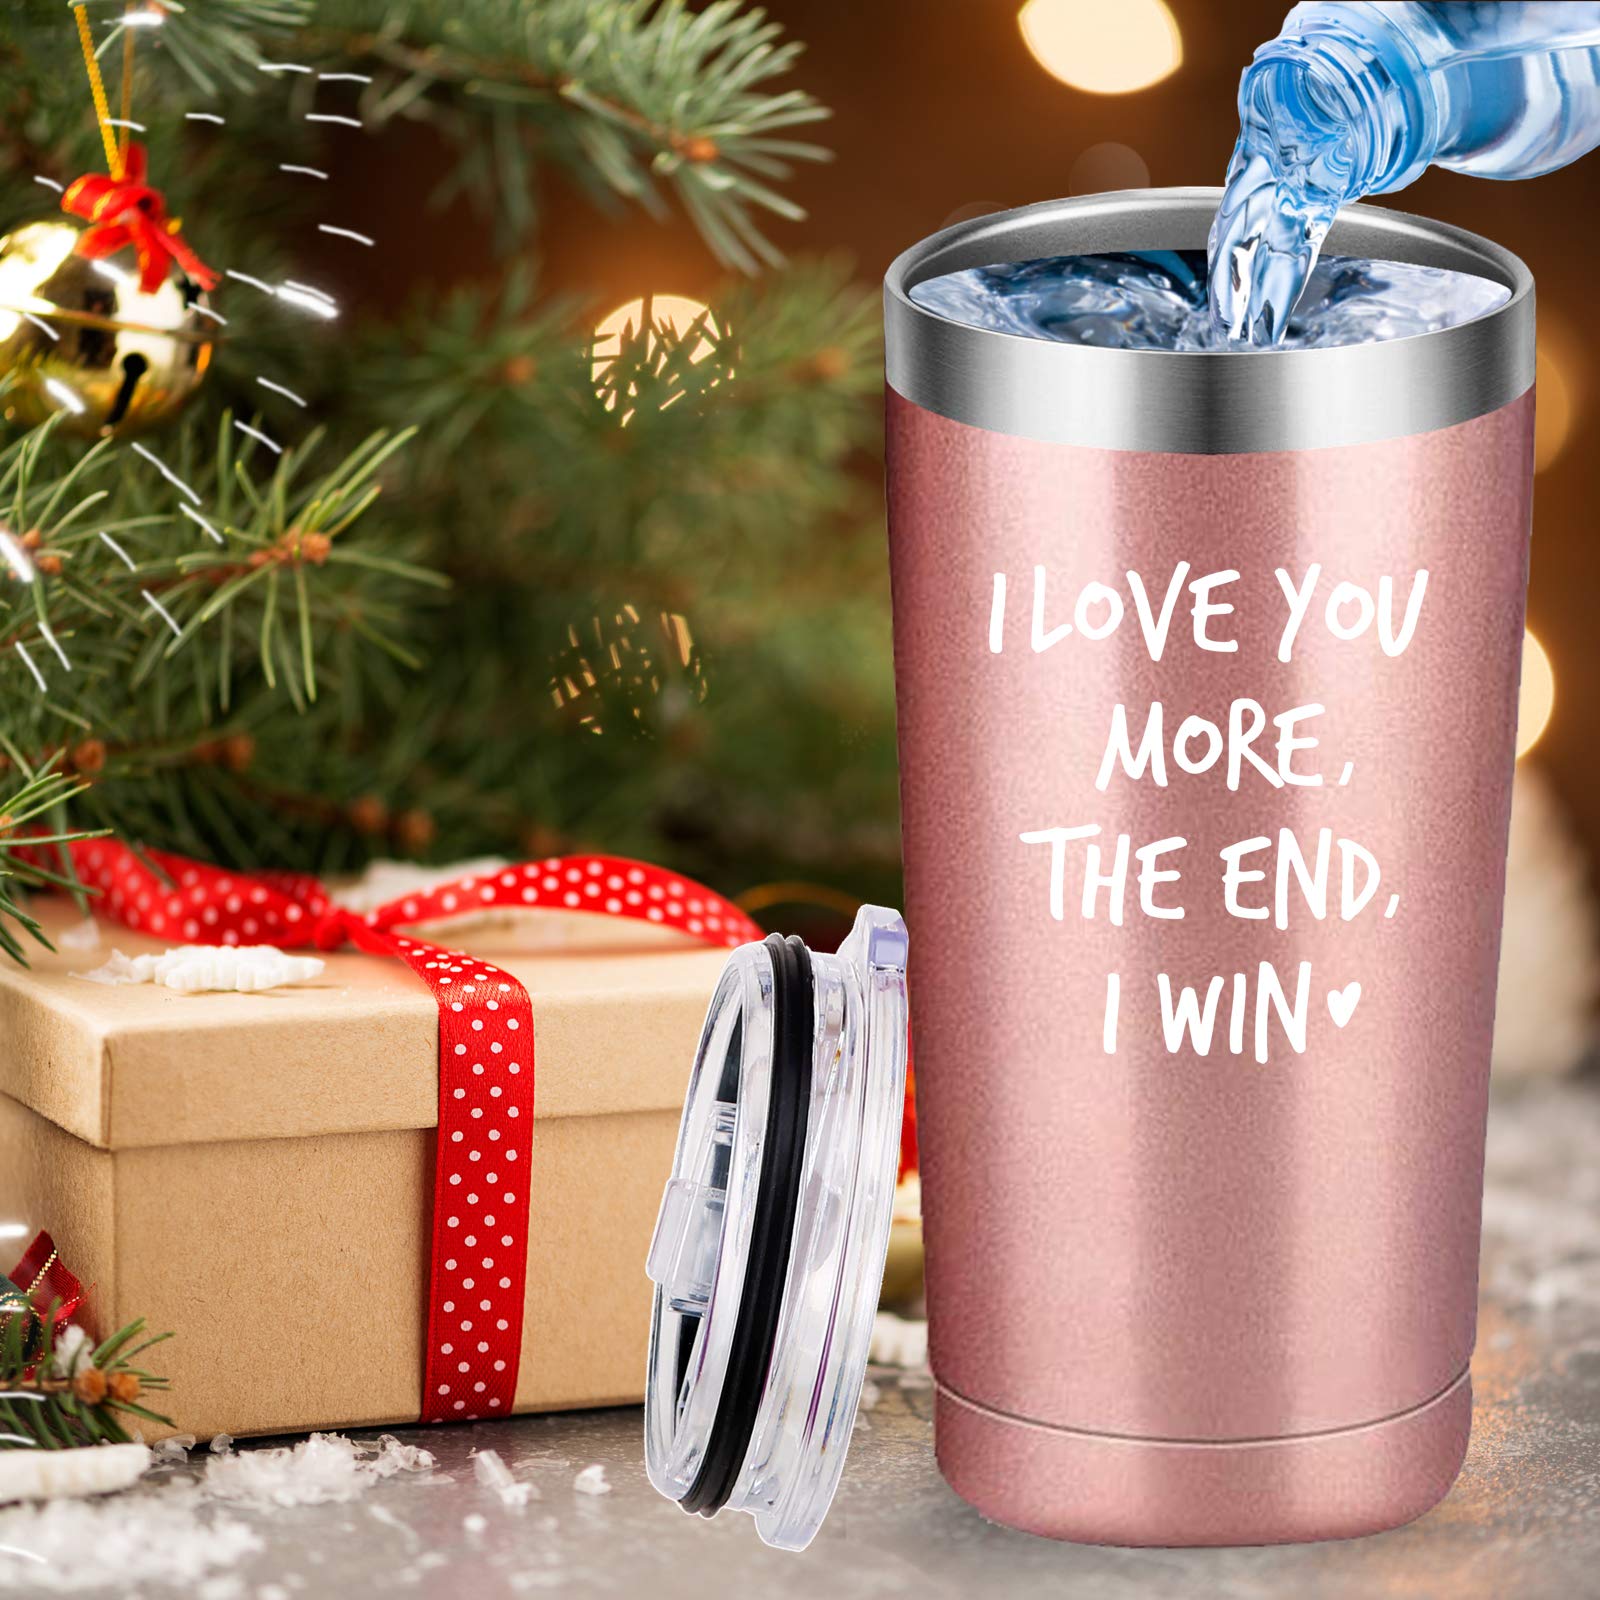 Mamihlap I Love You More The End I Win Travel Mug Tumbler.Funny Valentine's Day Anniversary Birthday Christmas Day Gifts for Men Women Wife Husband Boyfriend Girlfriend(20 oz Rose Gold)